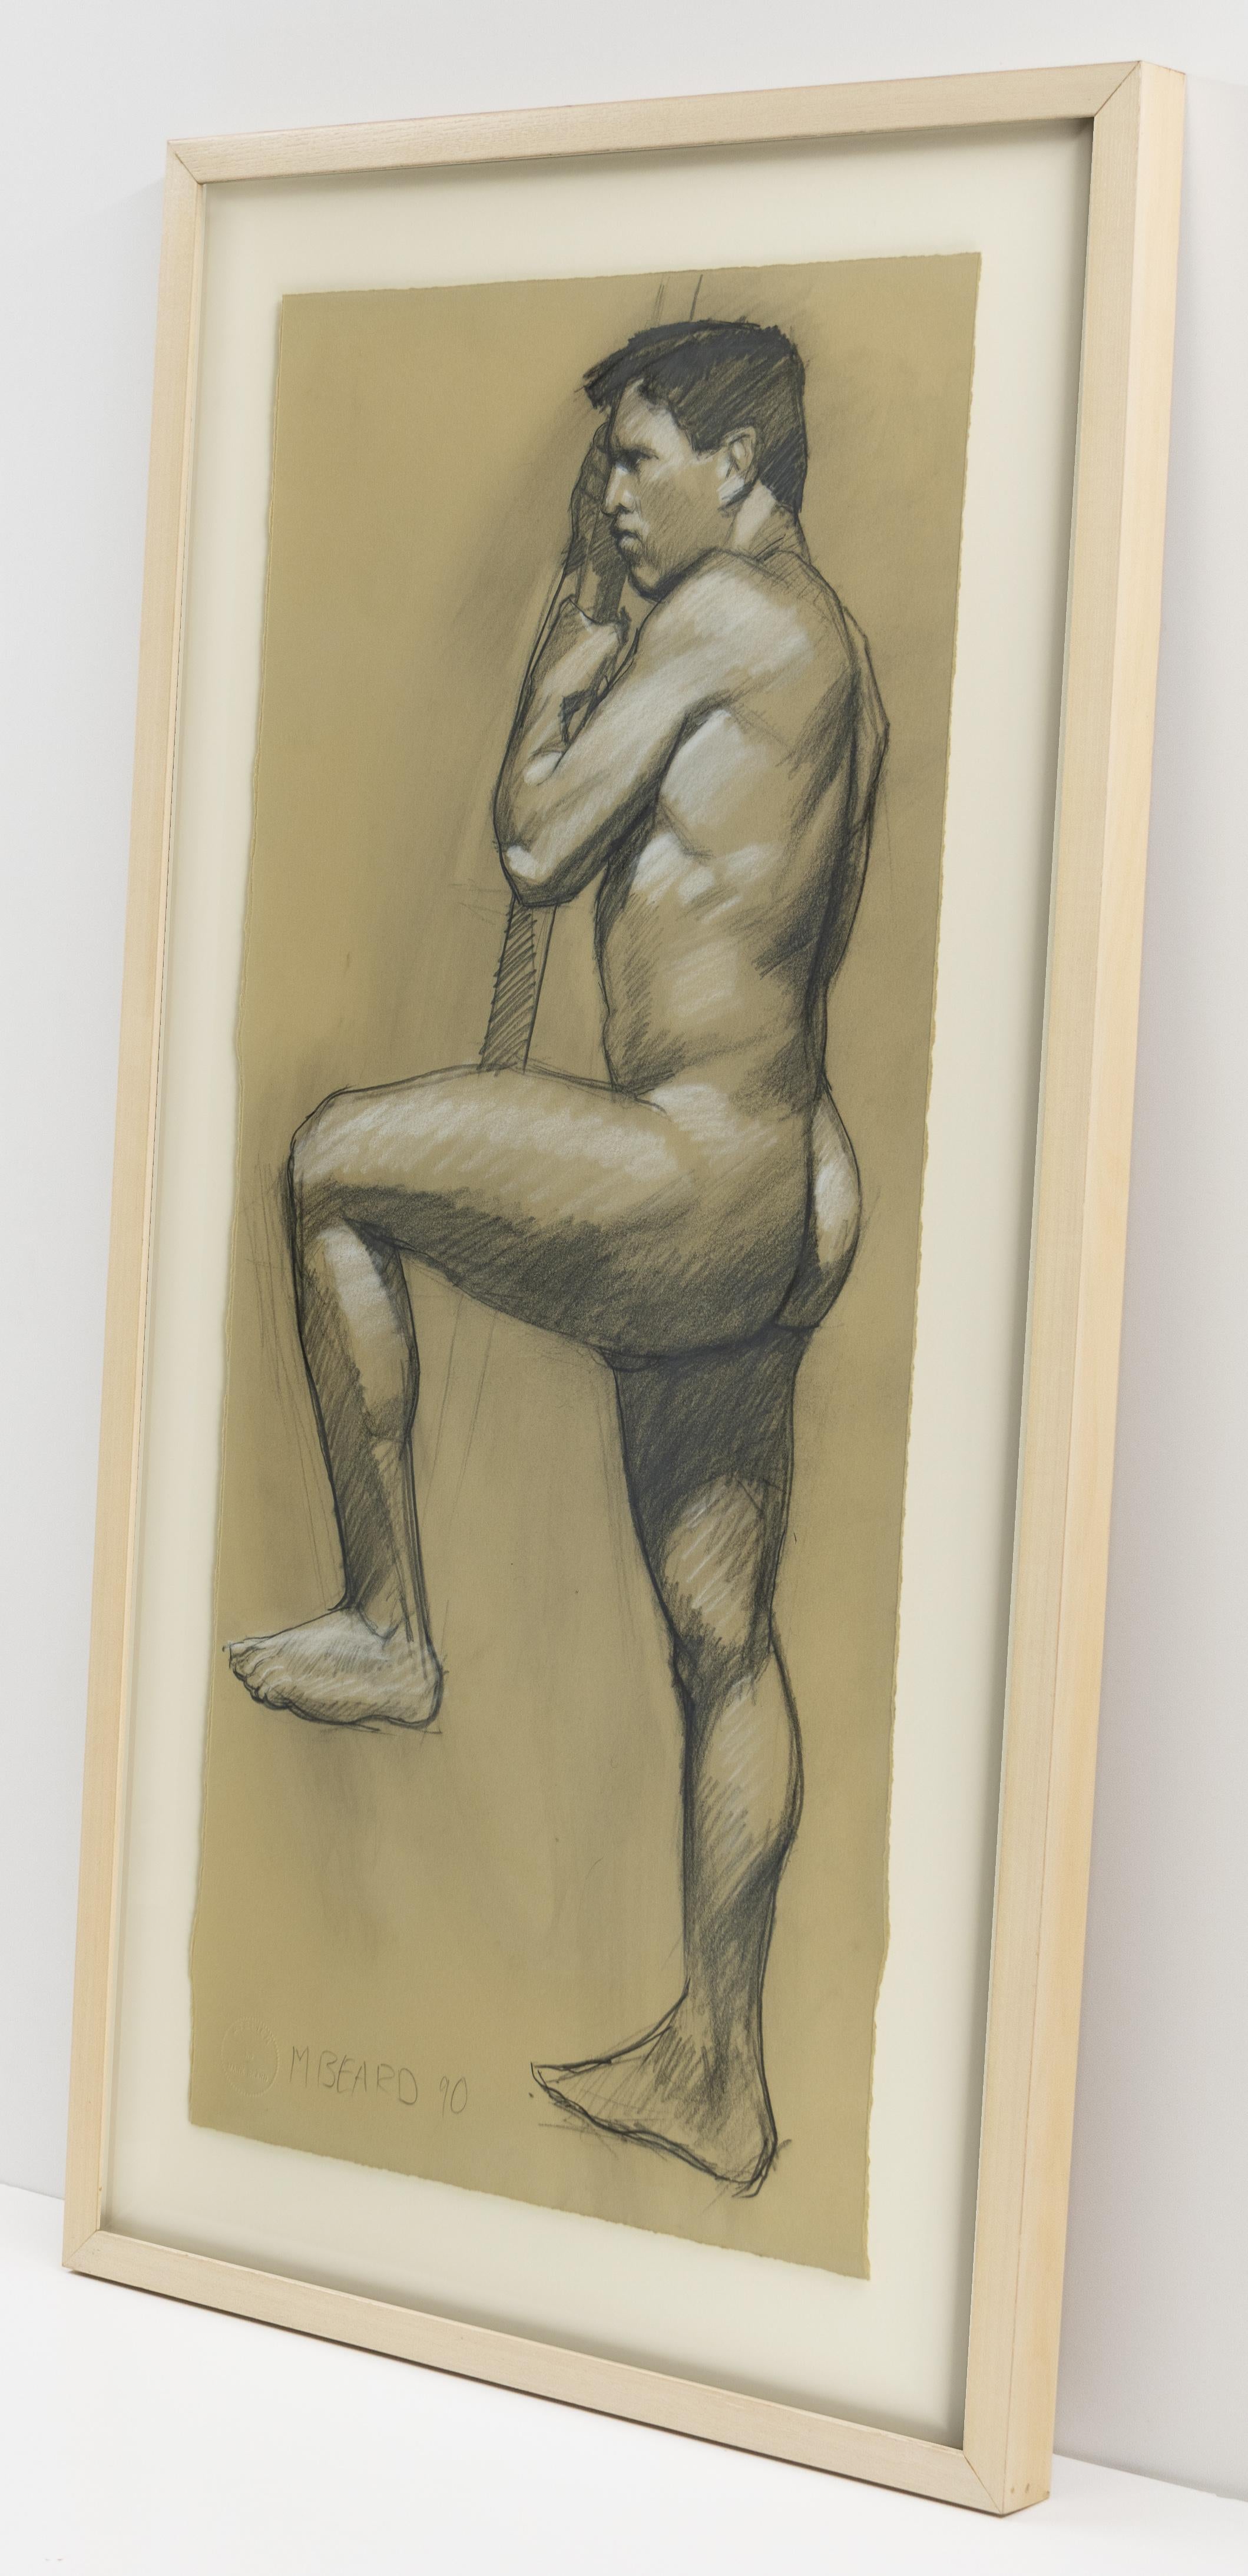 This drawing by Mark Beard is already framed, price includes framing.

Untitled (Nude Man with Raised Leg)
1990

Signed and dated, l.l.

Charcoal with red and white conté crayon on Rives BFK paper

29.5 x 14 inches

This work is offered by CLAMP in